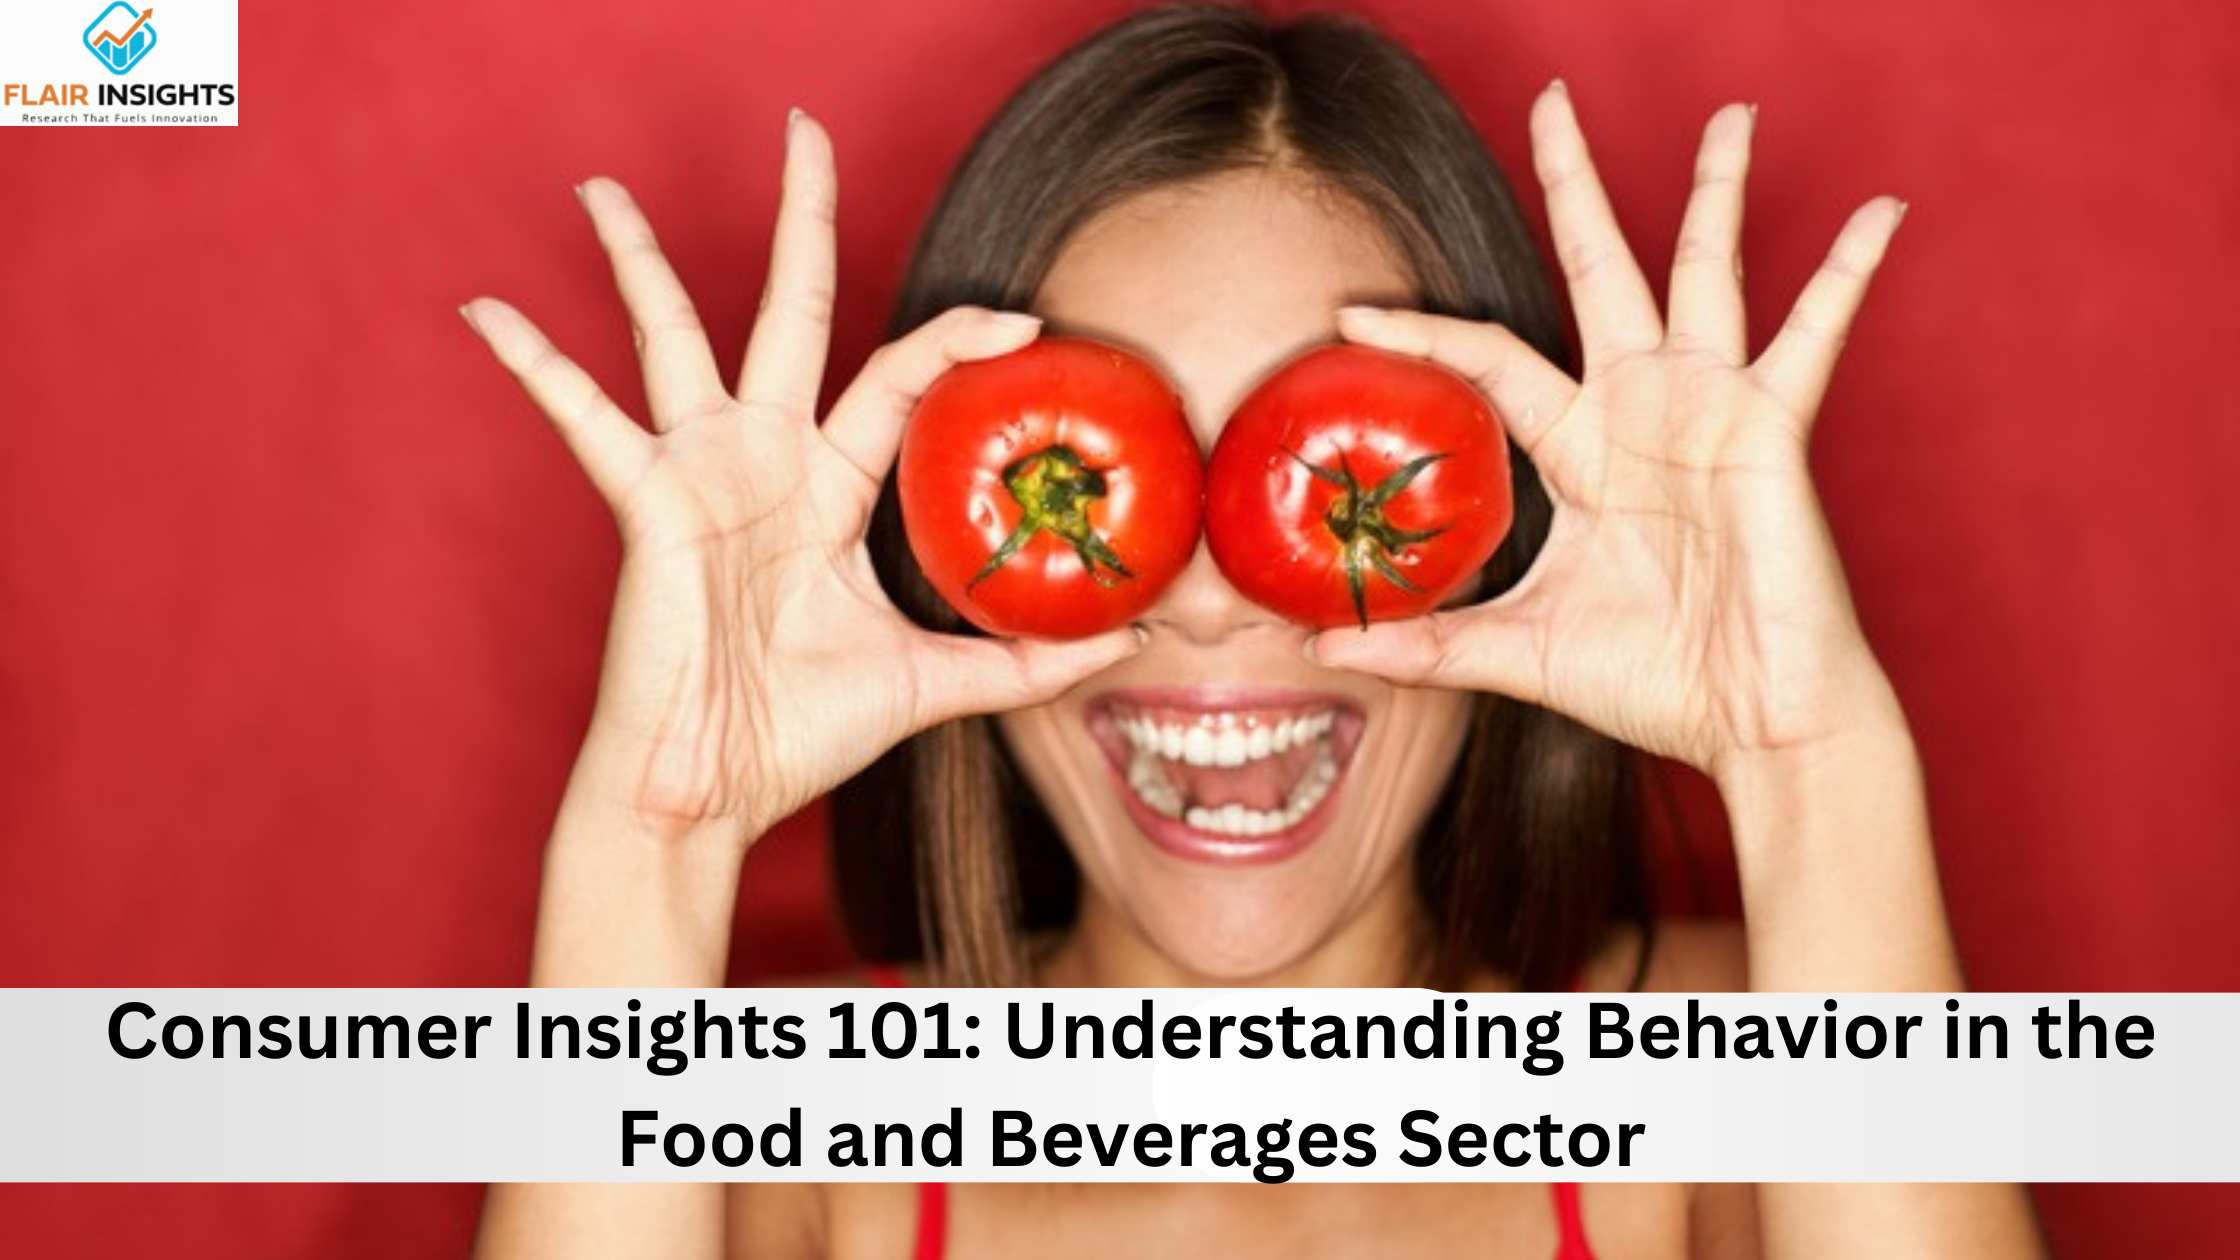 Consumer Insights 101: Understanding Behavior in the Food and Beverages Sector